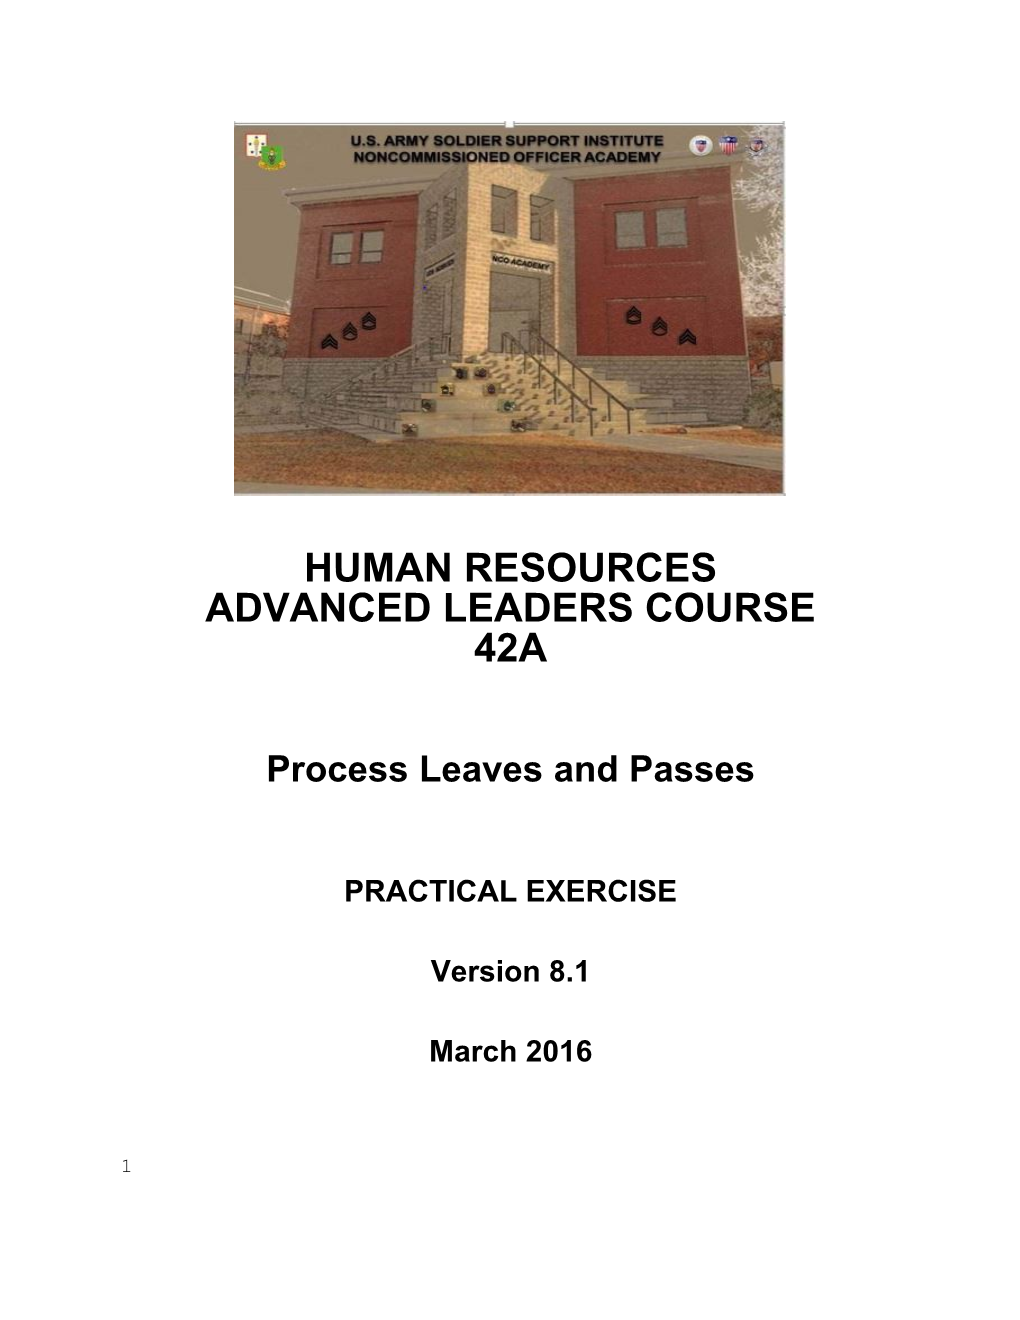 ALC Process Leaves and Passes Practical Exercise